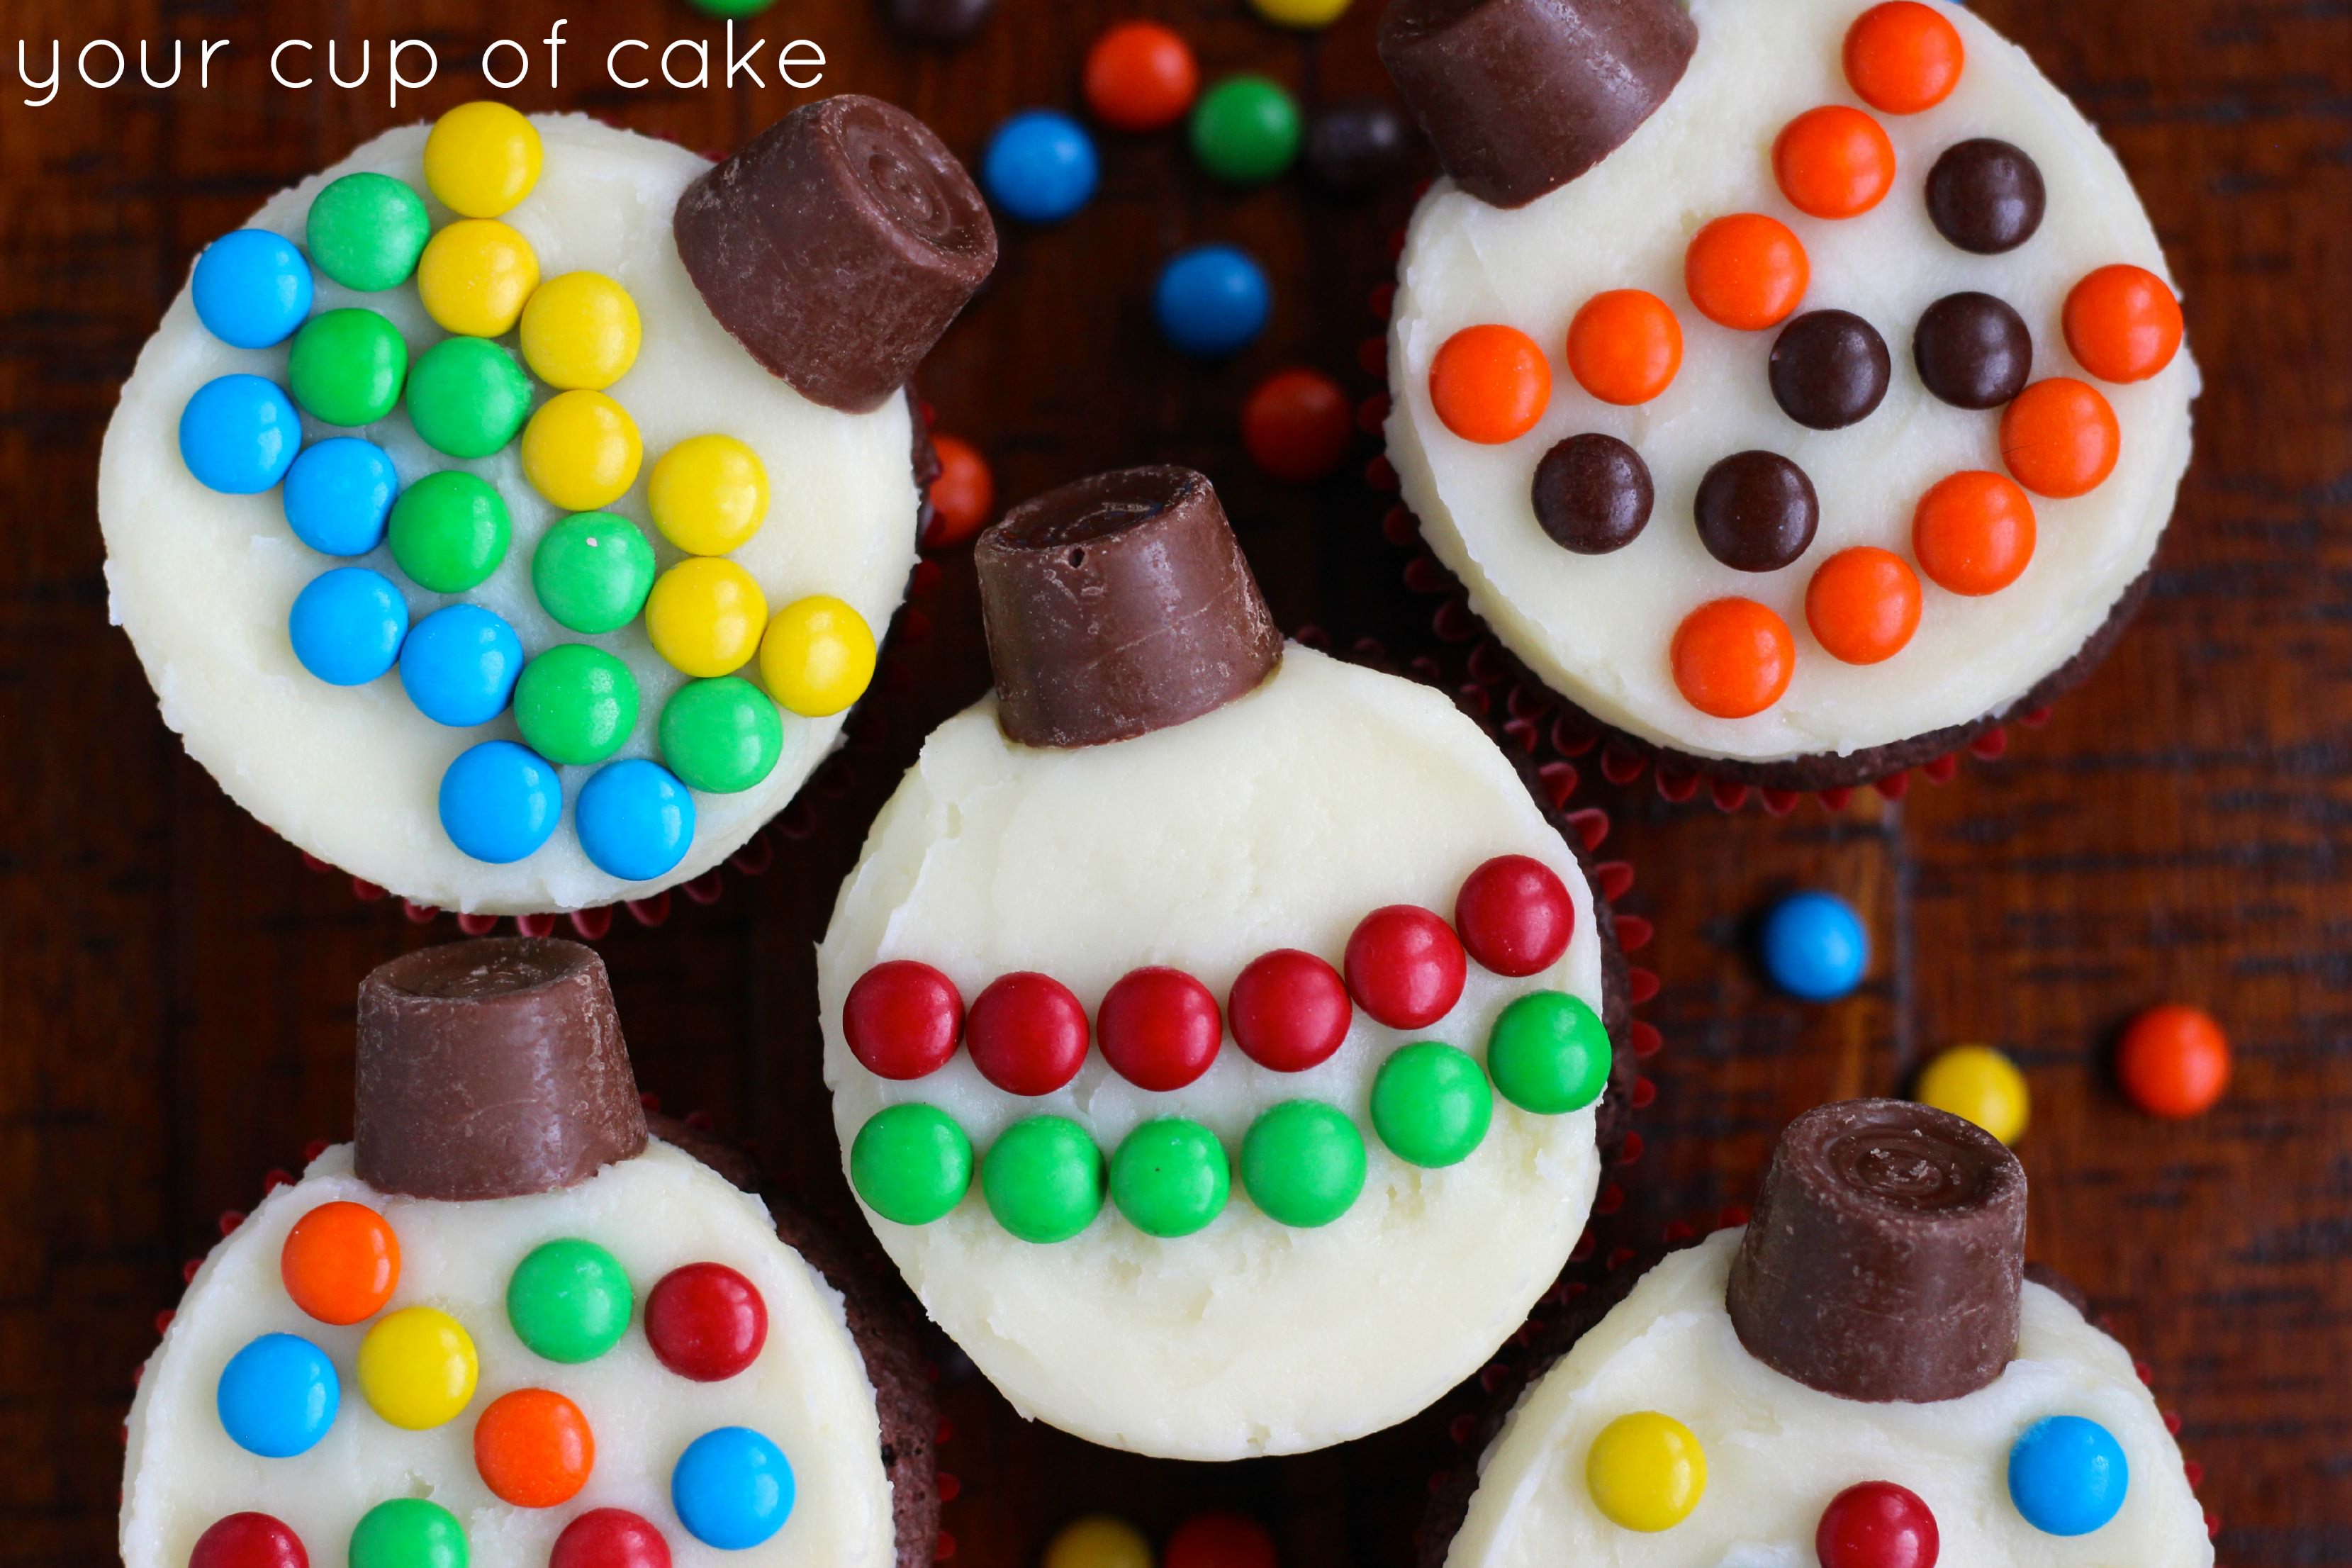 Christmas Cupcakes  Fun and Easy to Decorate!